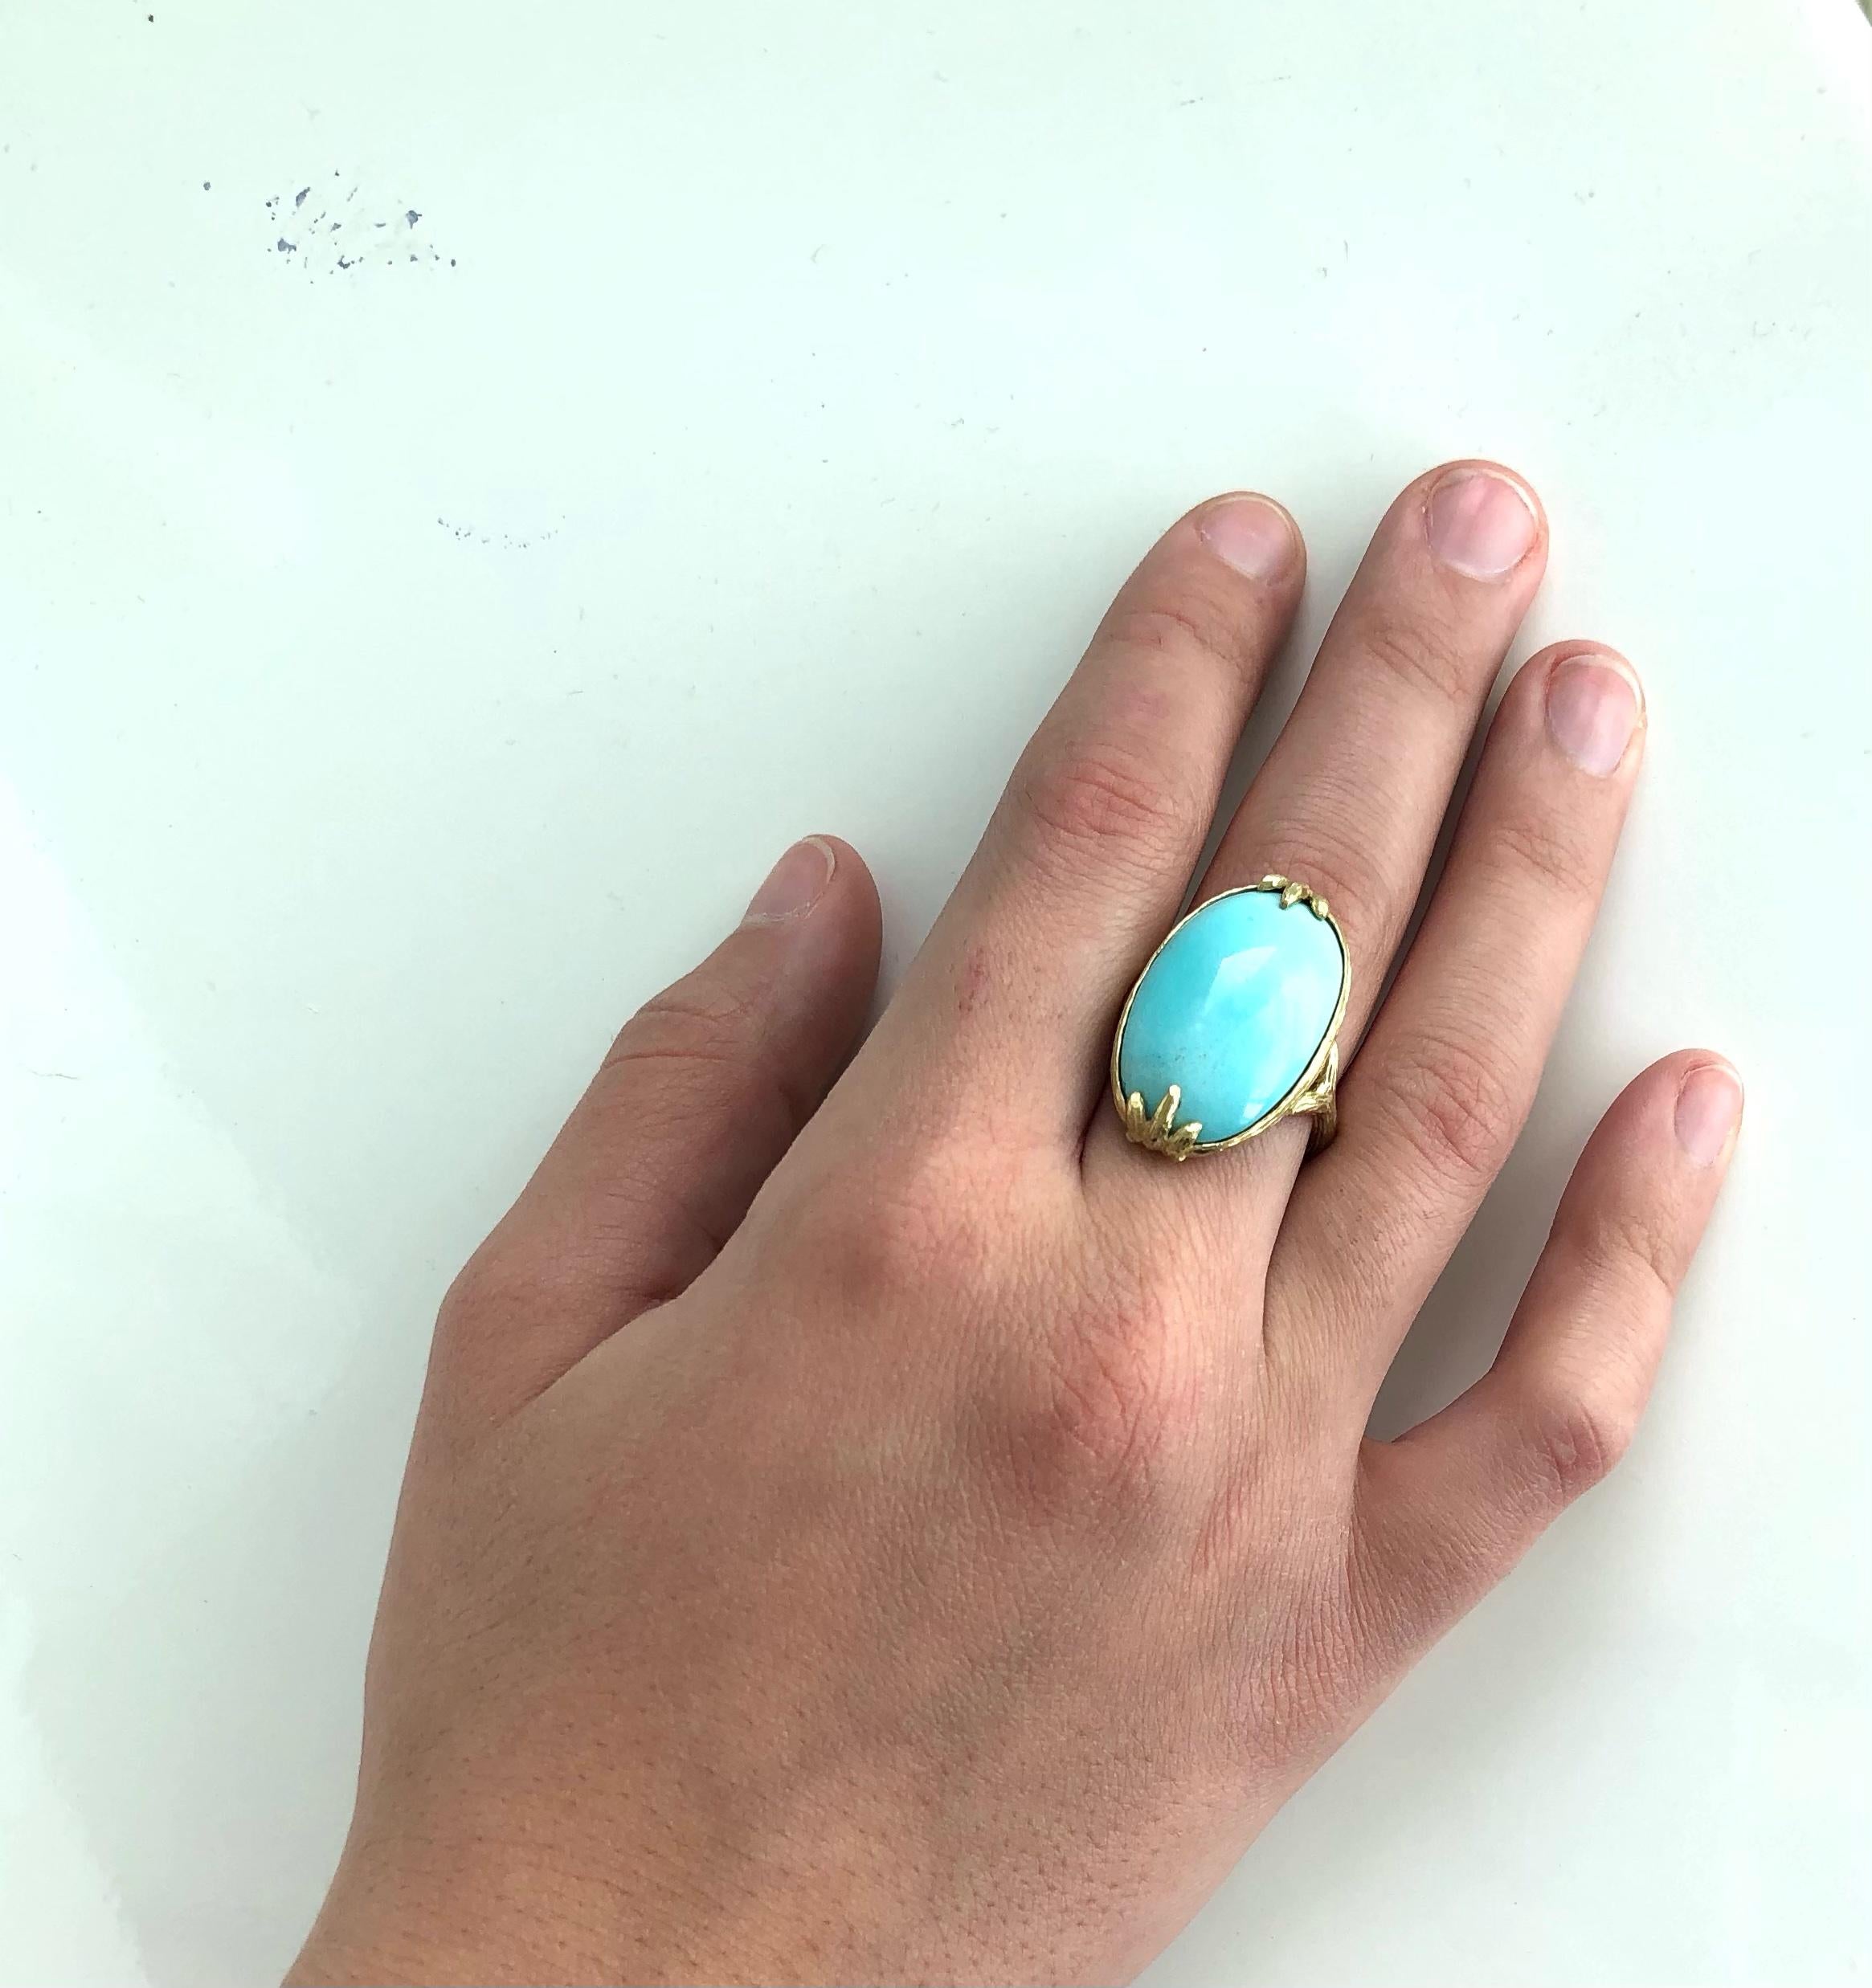 
Time-honored, sky blue Persian turquoise- considered the best and rarest- is the bold yet soothing centerpiece of this creation. The smooth cabochon is embraced by the 18k gold twig-textured shank. This ring makes a quiet but memorable